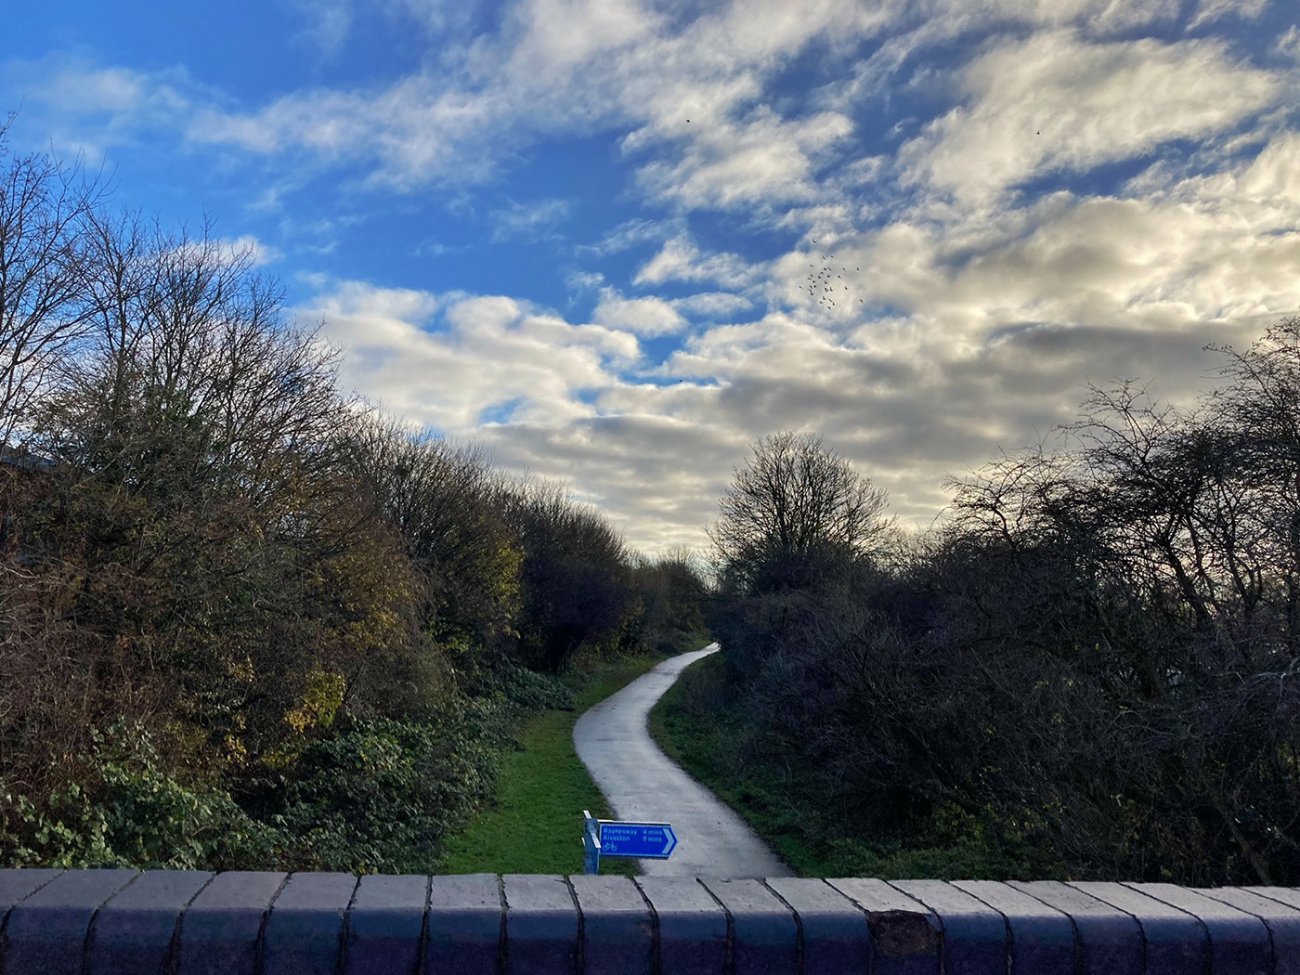 Photograph of Linear Park viewed from Station Road bridge